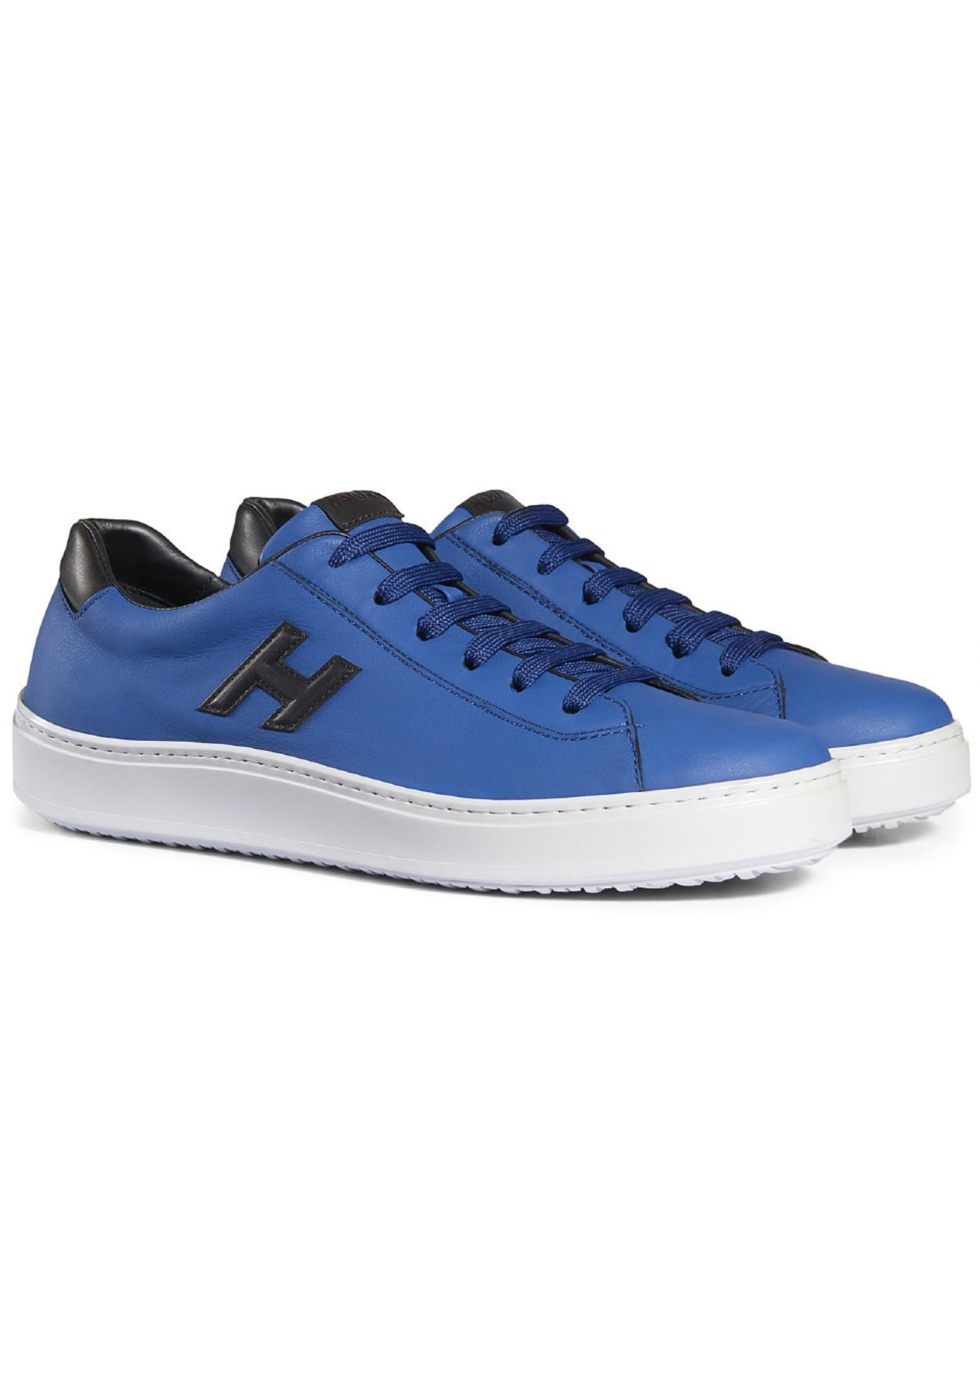 Hogan H302 men's sneakers shoes in blue leather - Italian Boutique